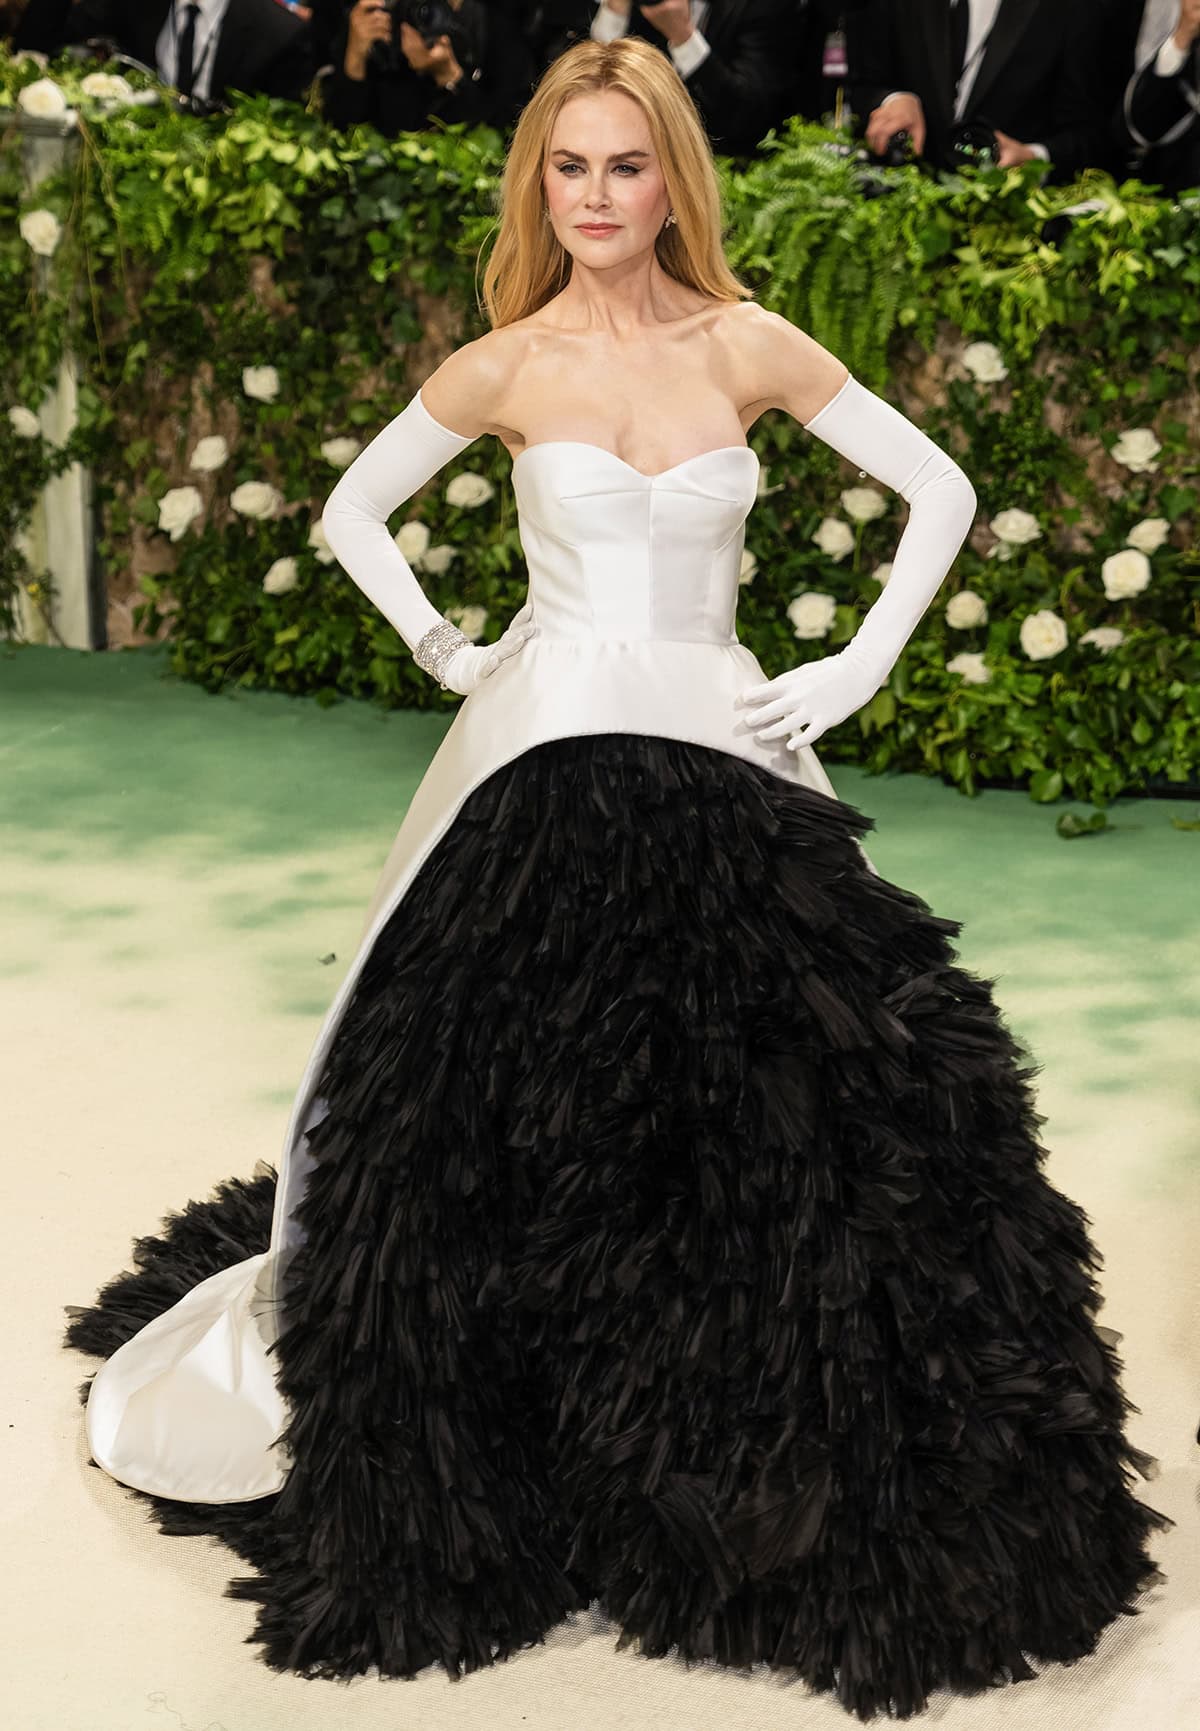 Nicole Kidman's black-and-white Met Gala gown features a white satin bustier top, cascading down her back and partially overlaying a black organza ruffle skirt